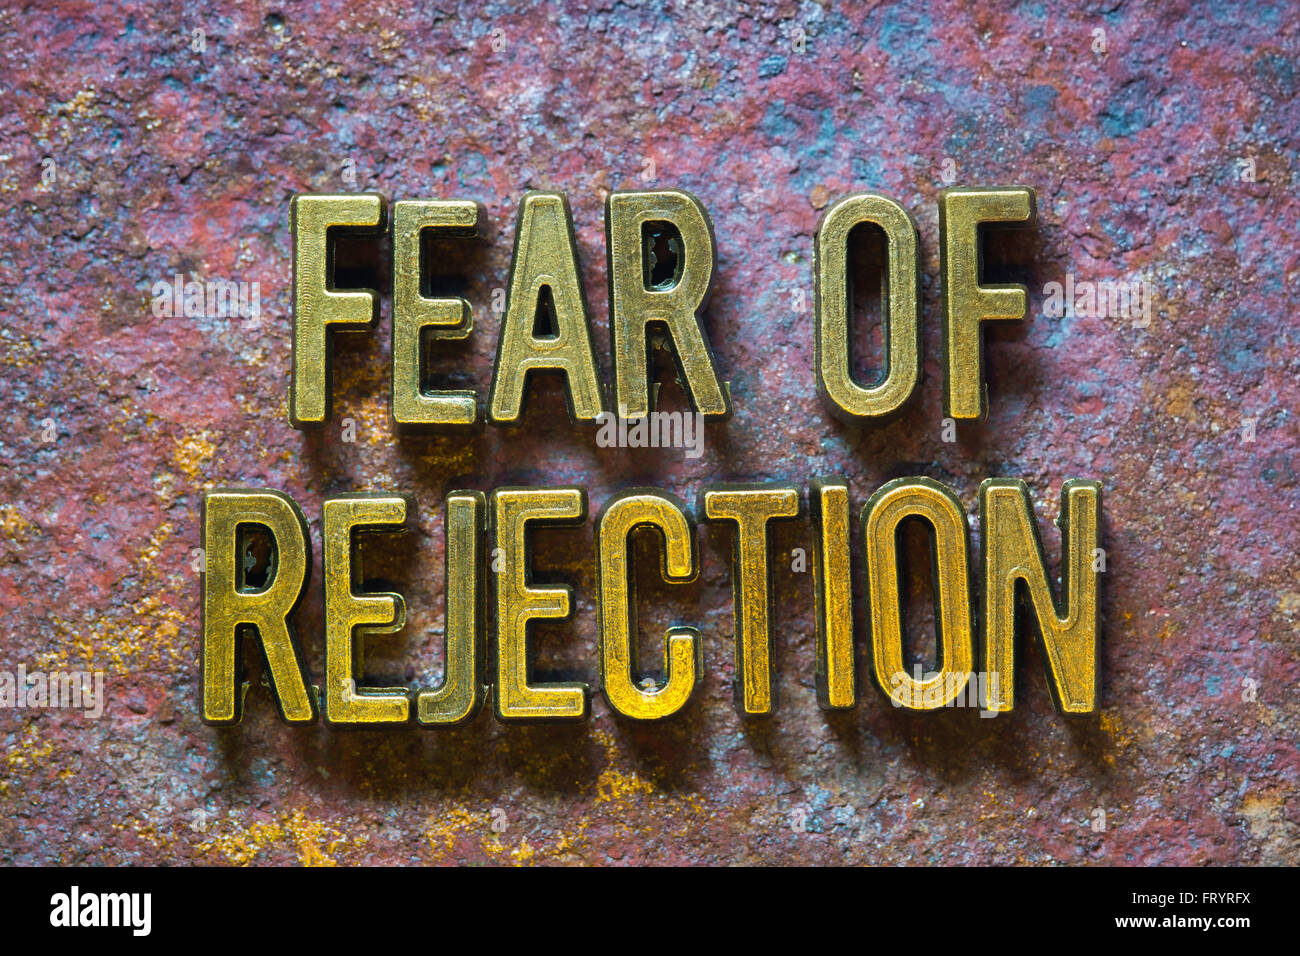 fear of rejection phrase made from metallic letters over rusty metallic background Stock Photo